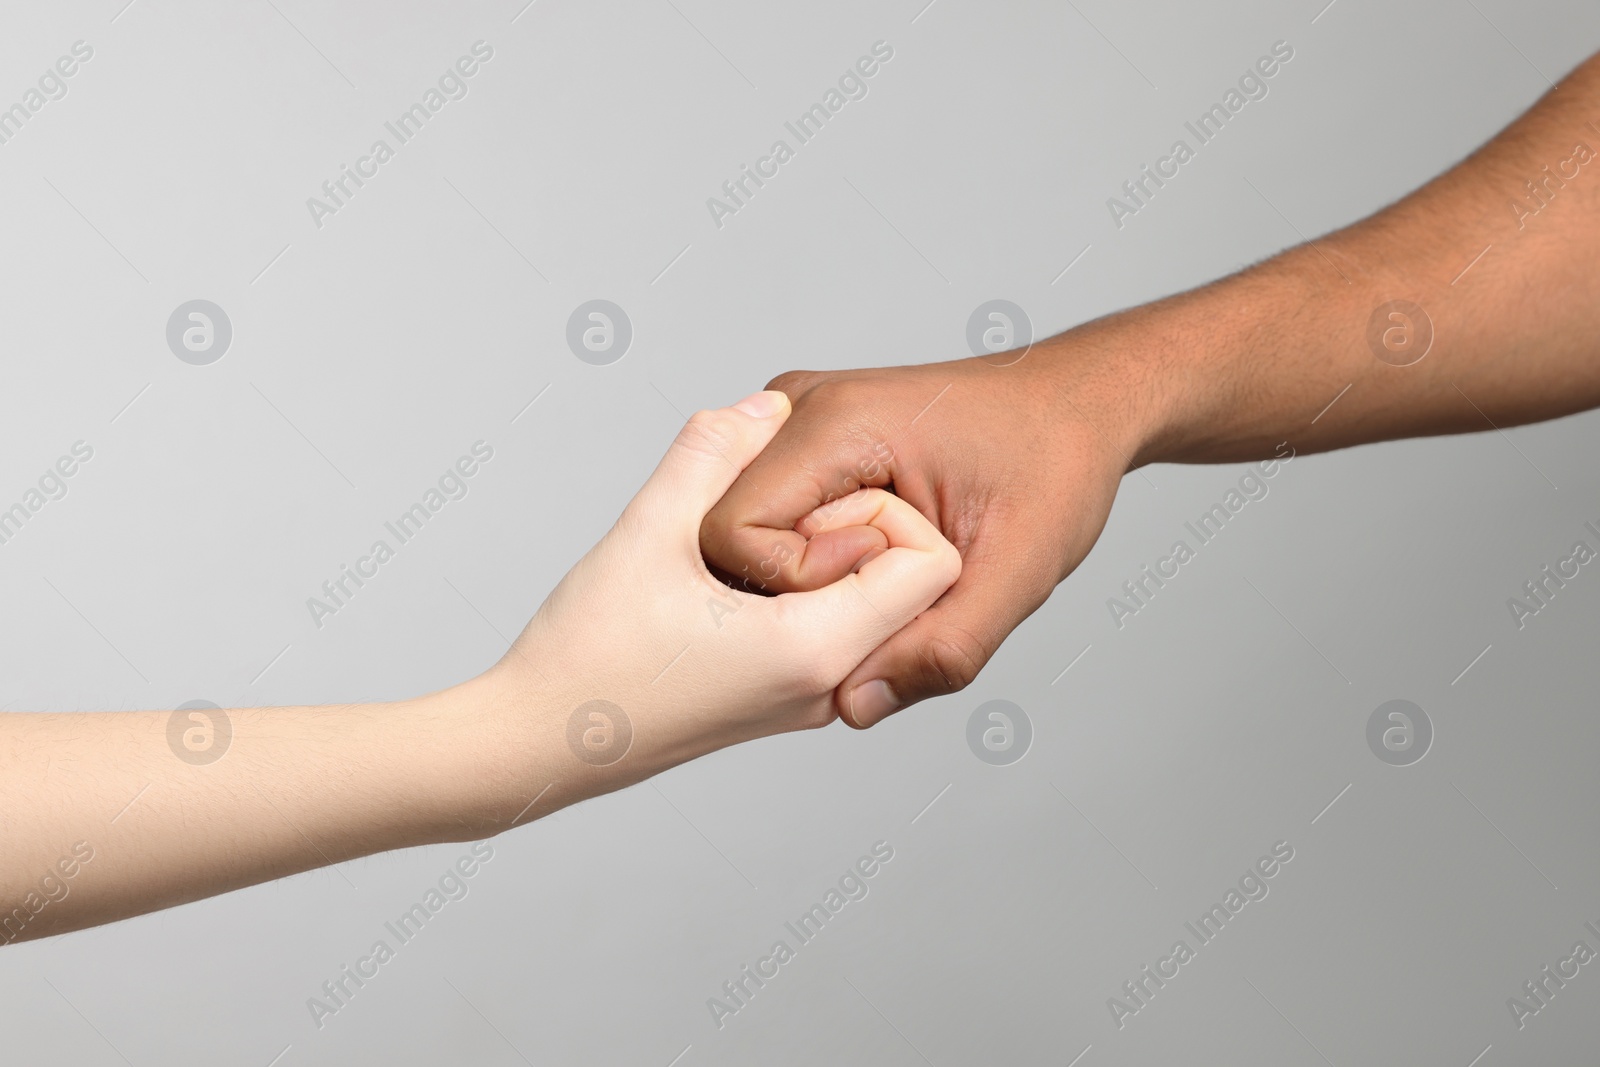 Photo of International relationships. People strongly joining hands on light grey background, closeup